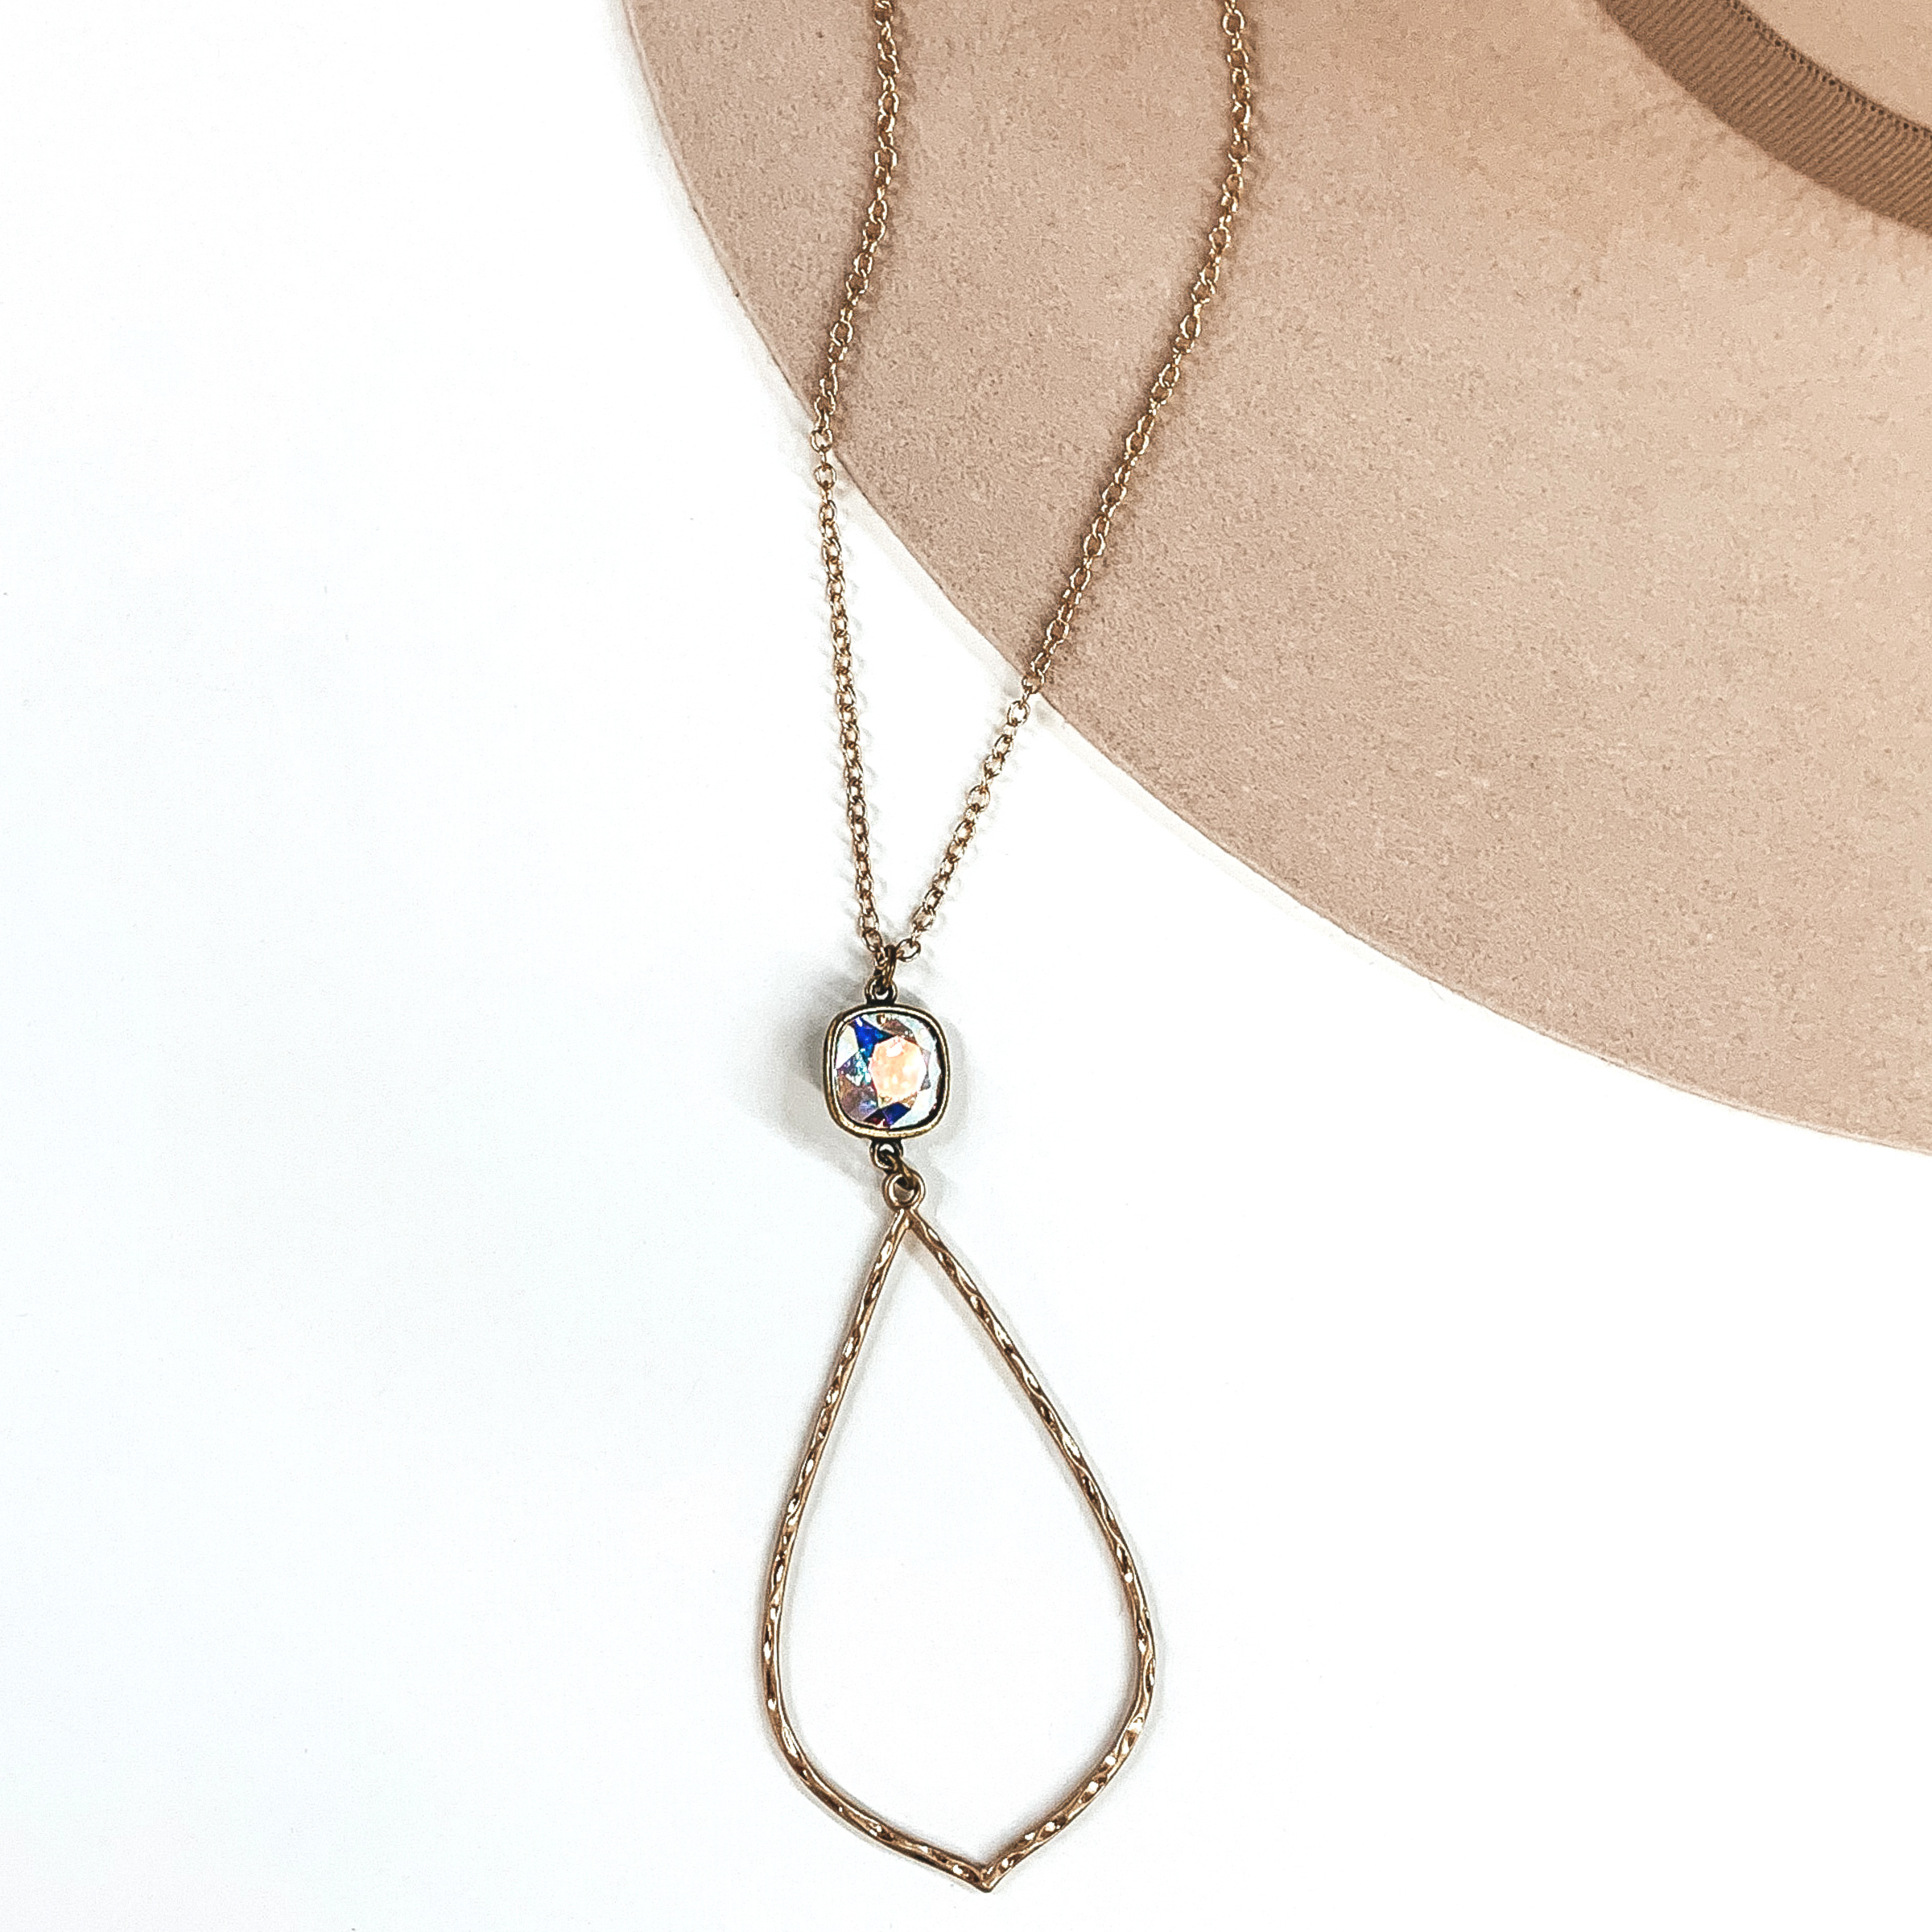 Small gold chained necklace with hanging ab cushion cut crystal and thin hammered teardrop pendant. This necklace is pictured on a white and beige background.